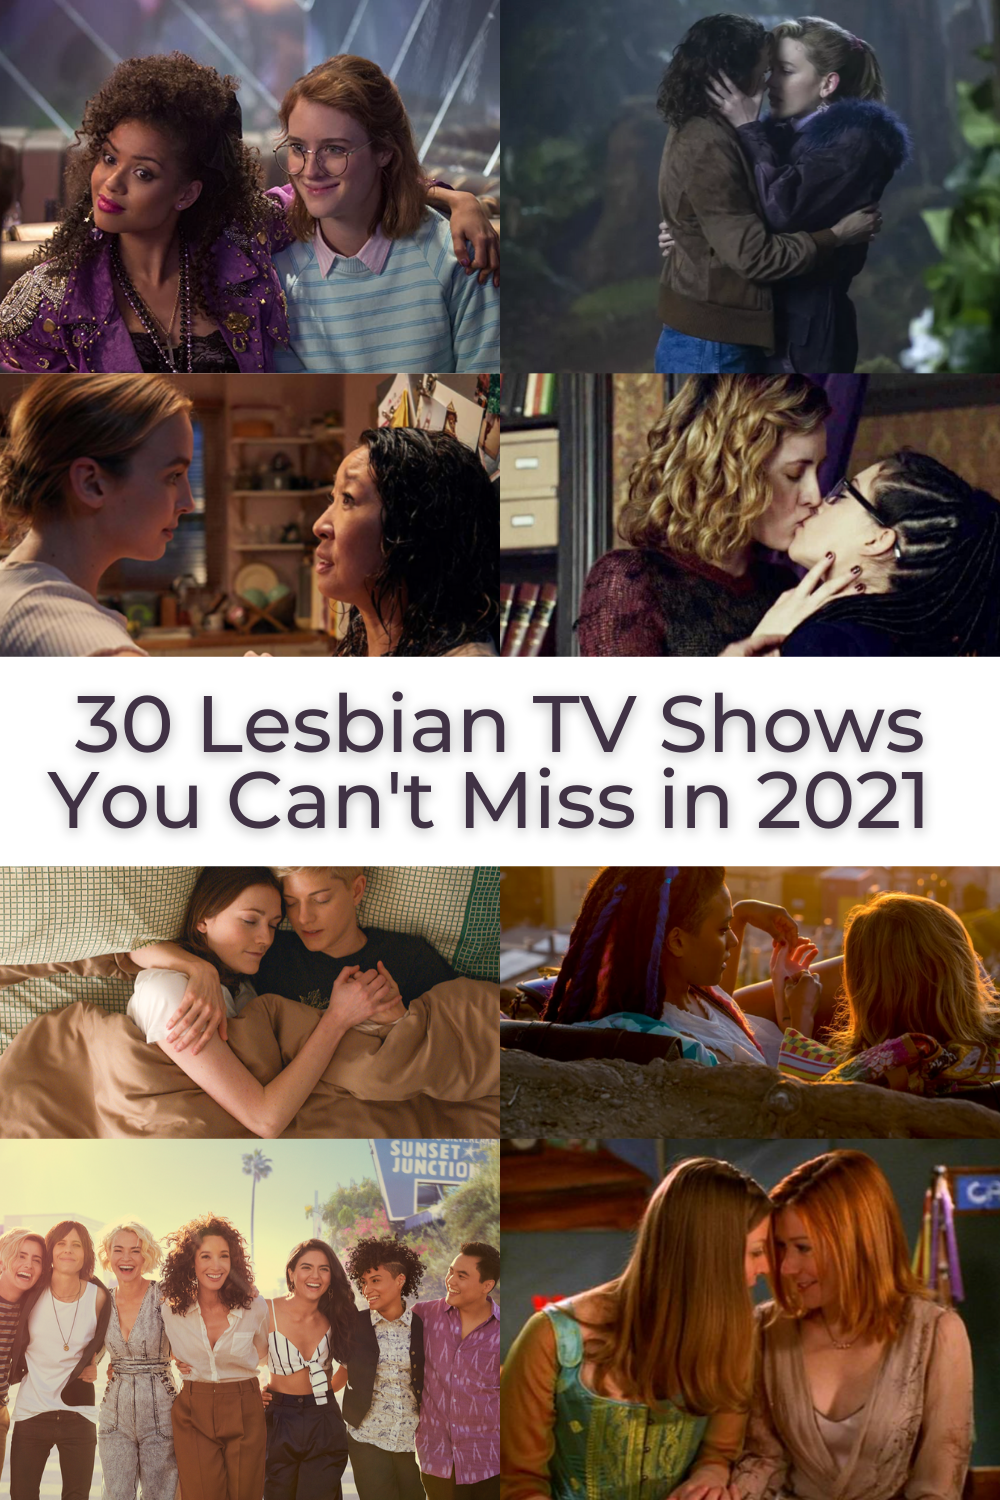 The 30 Best Queer and Lesbian TV Shows in 2021 pic